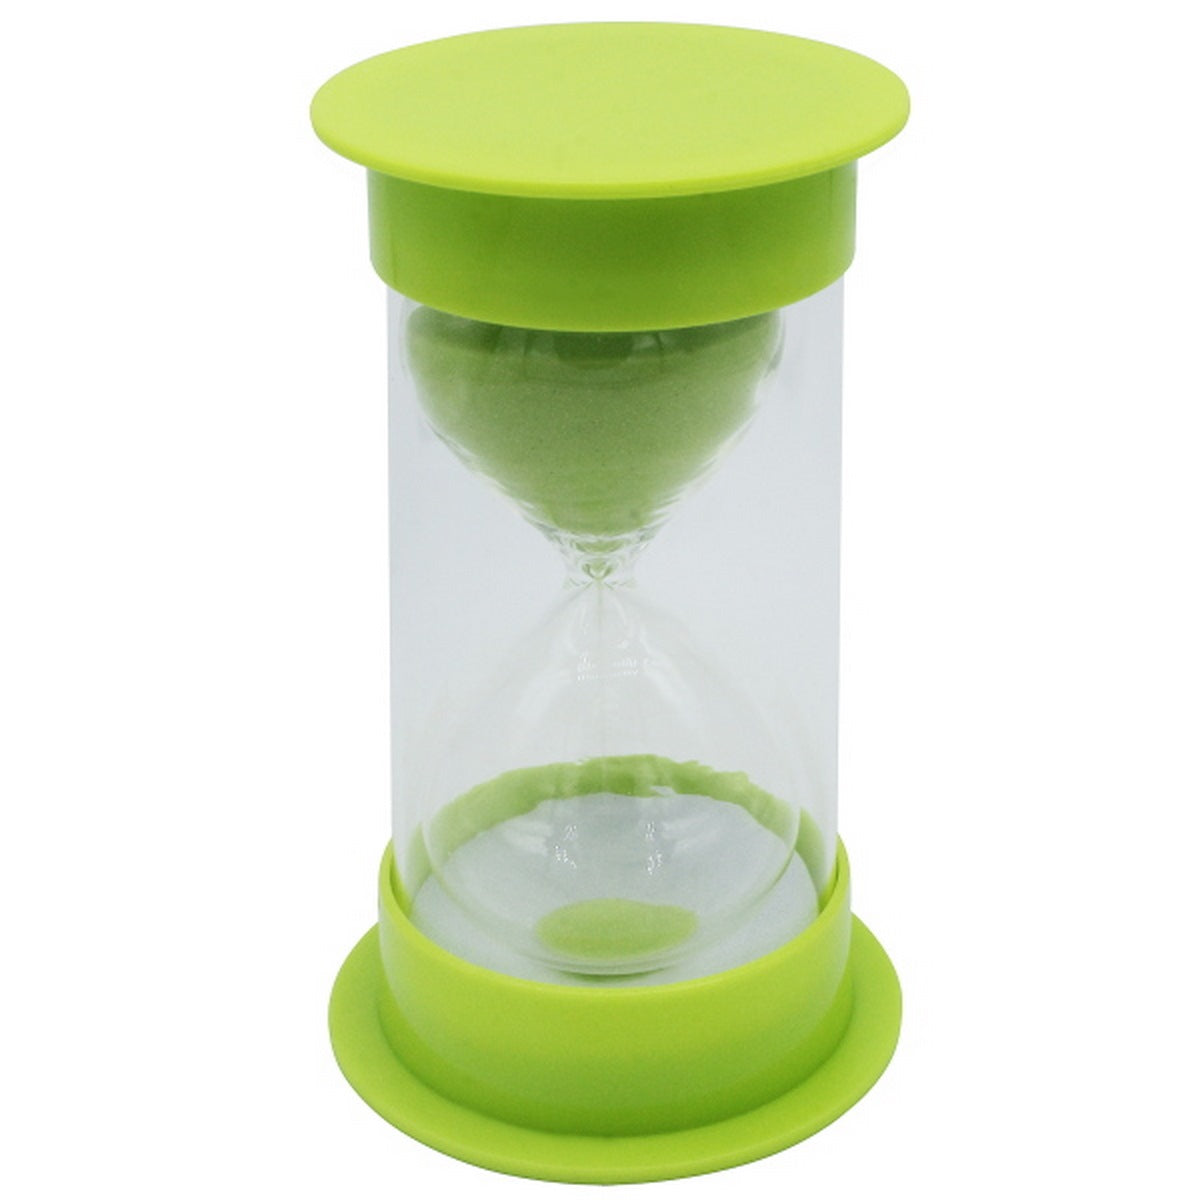 jags-mumbai Sand & Clock Timers Sand Timer Plastic Round Double Glass Minute